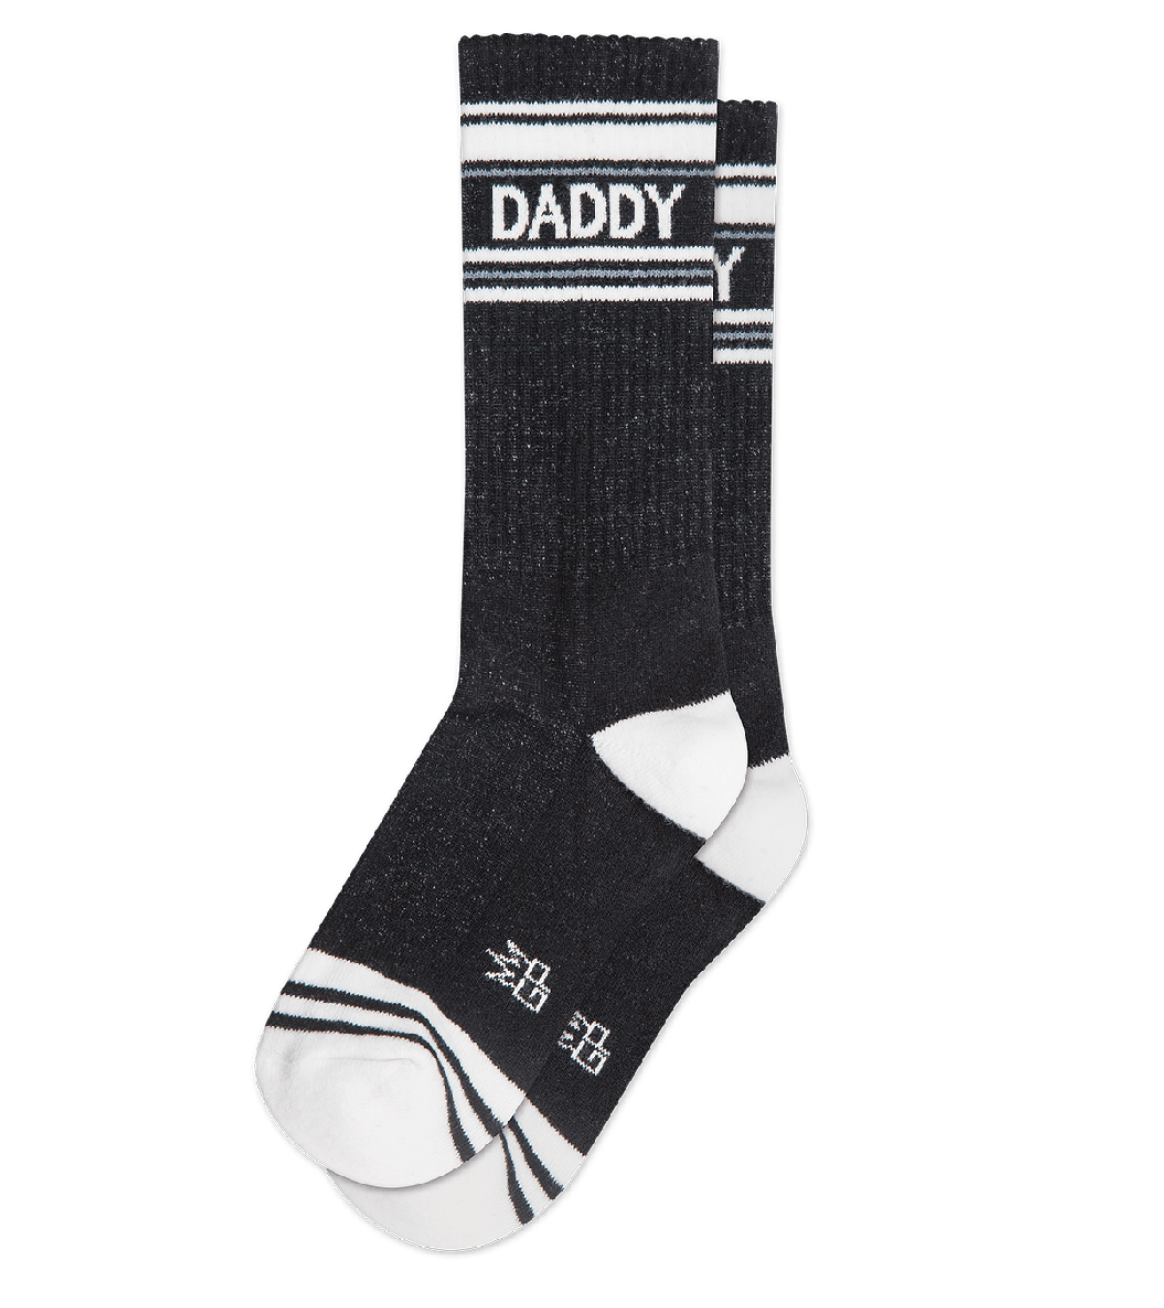 Daddy Gym Socks Unisex by Gumball Poodle Sold at Le Monkey House